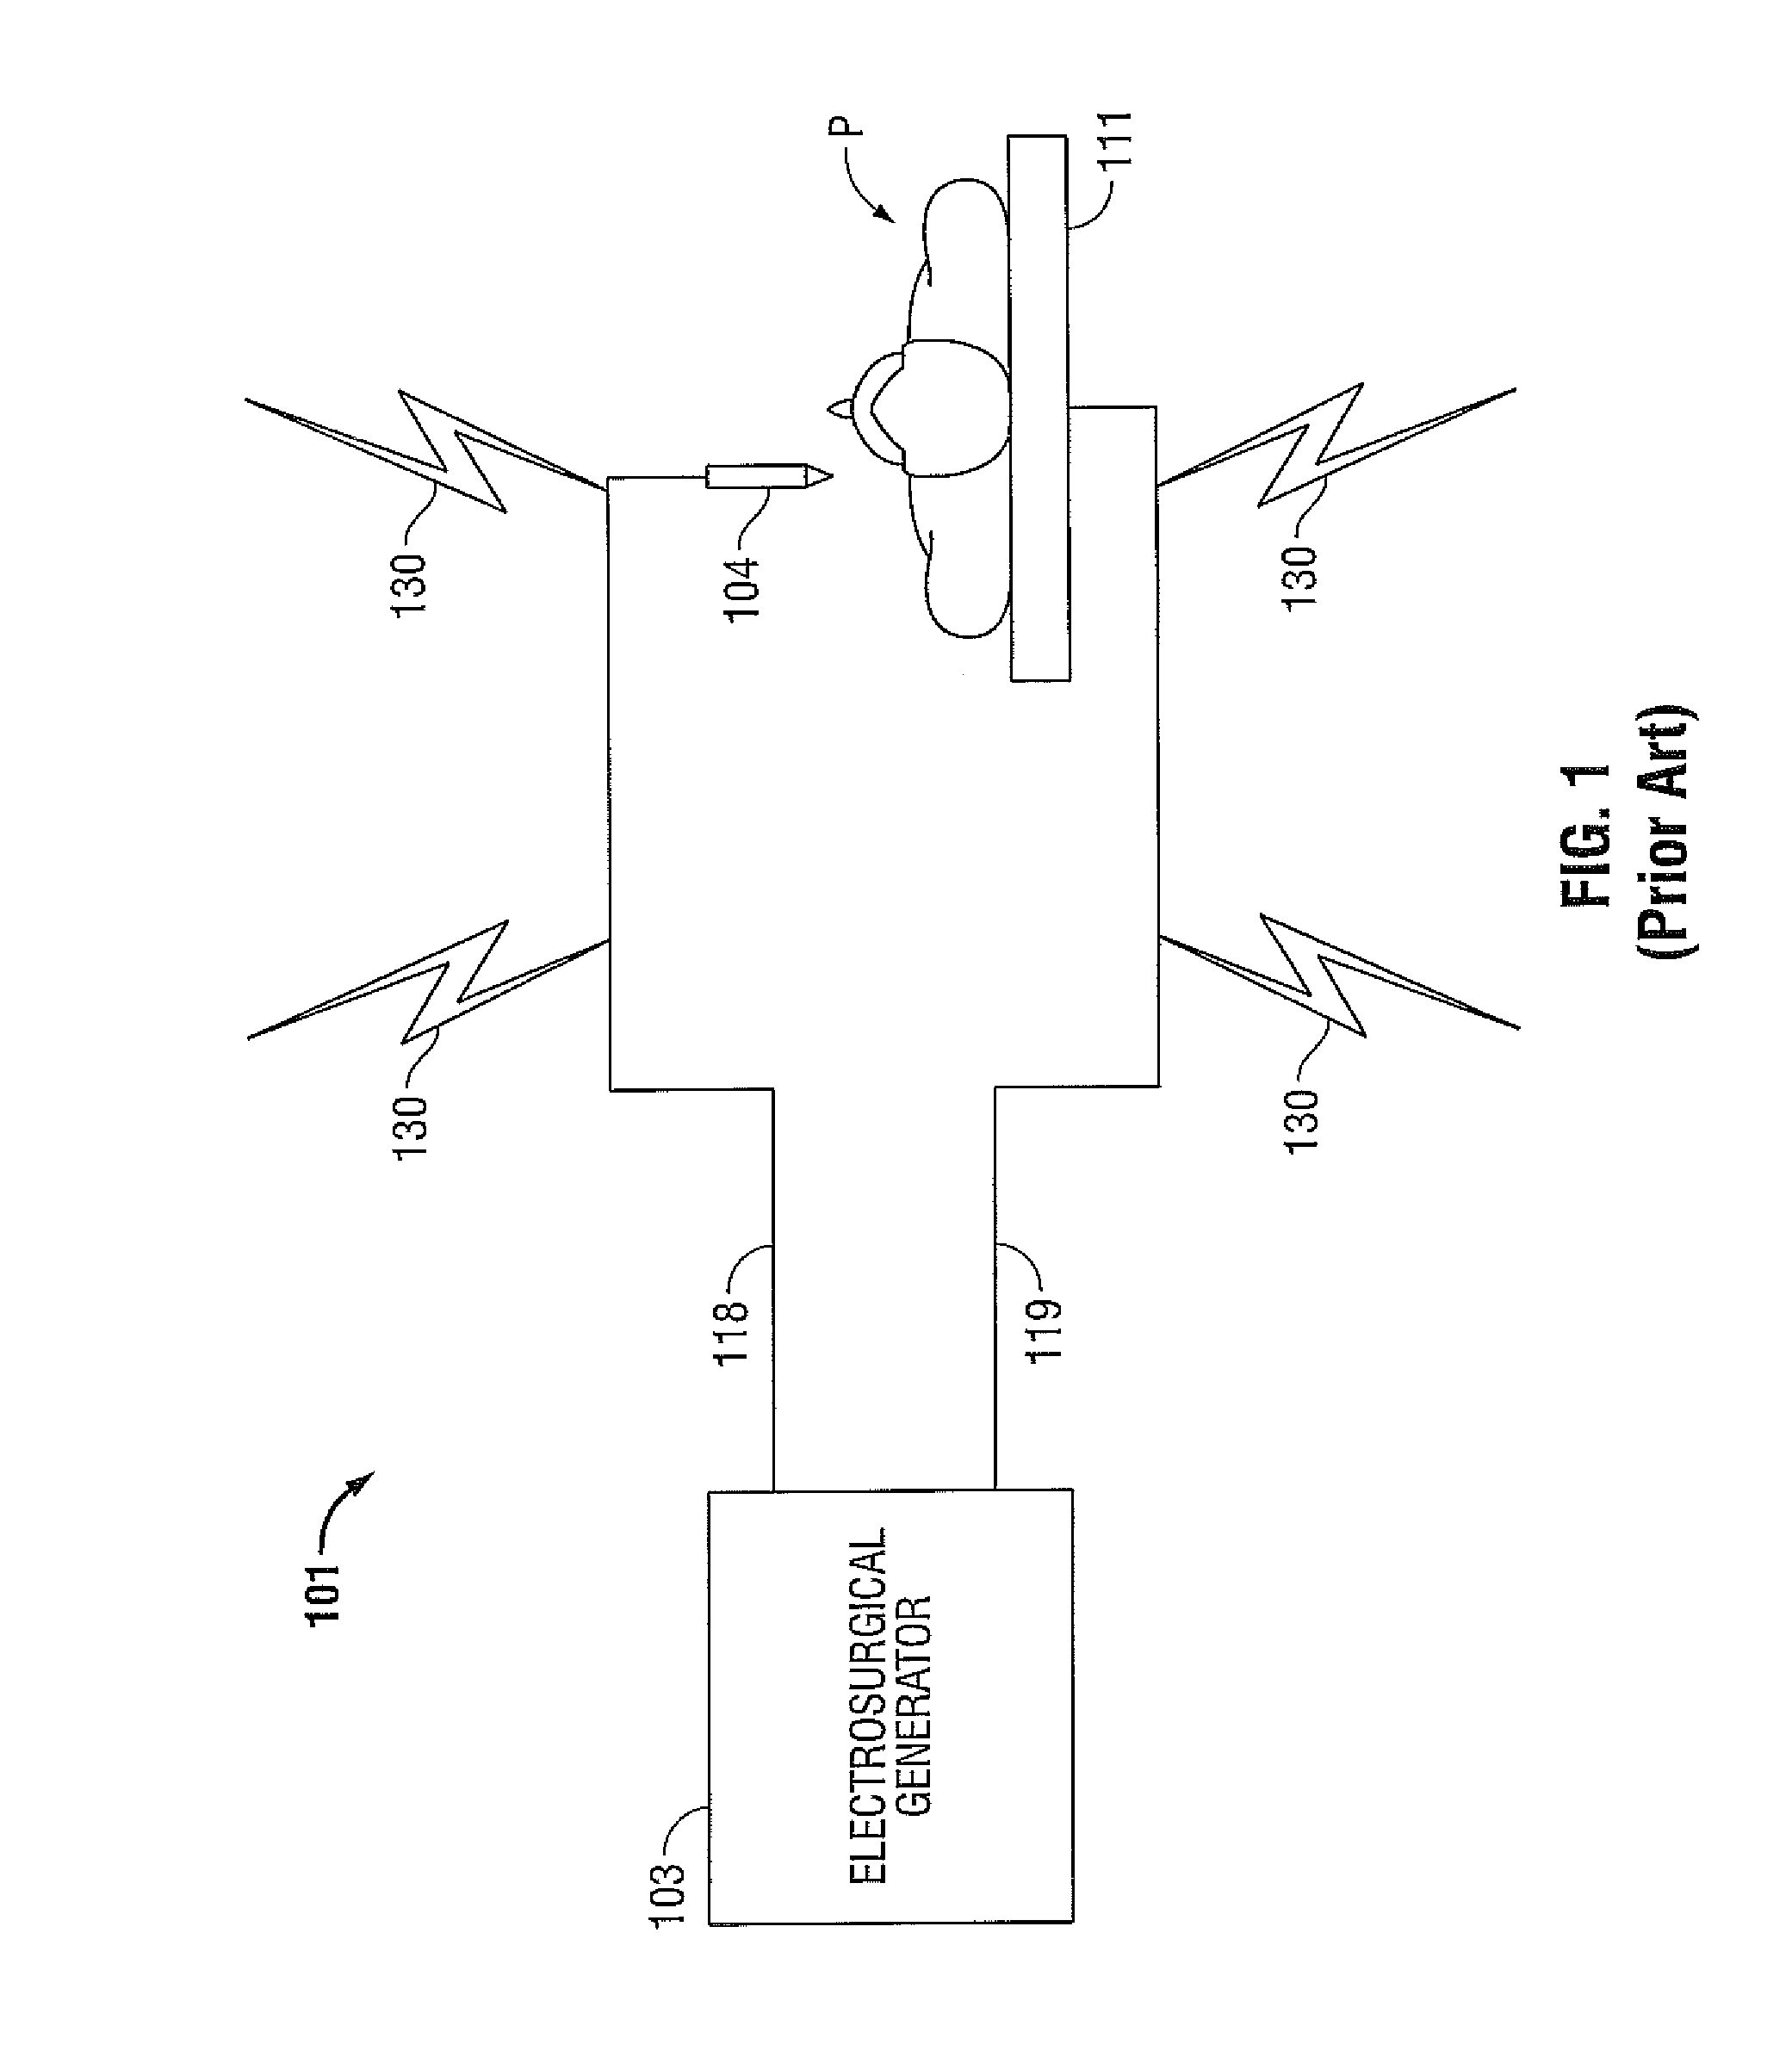 Electrosurgical apparatus with tissue site sensing and feedback control